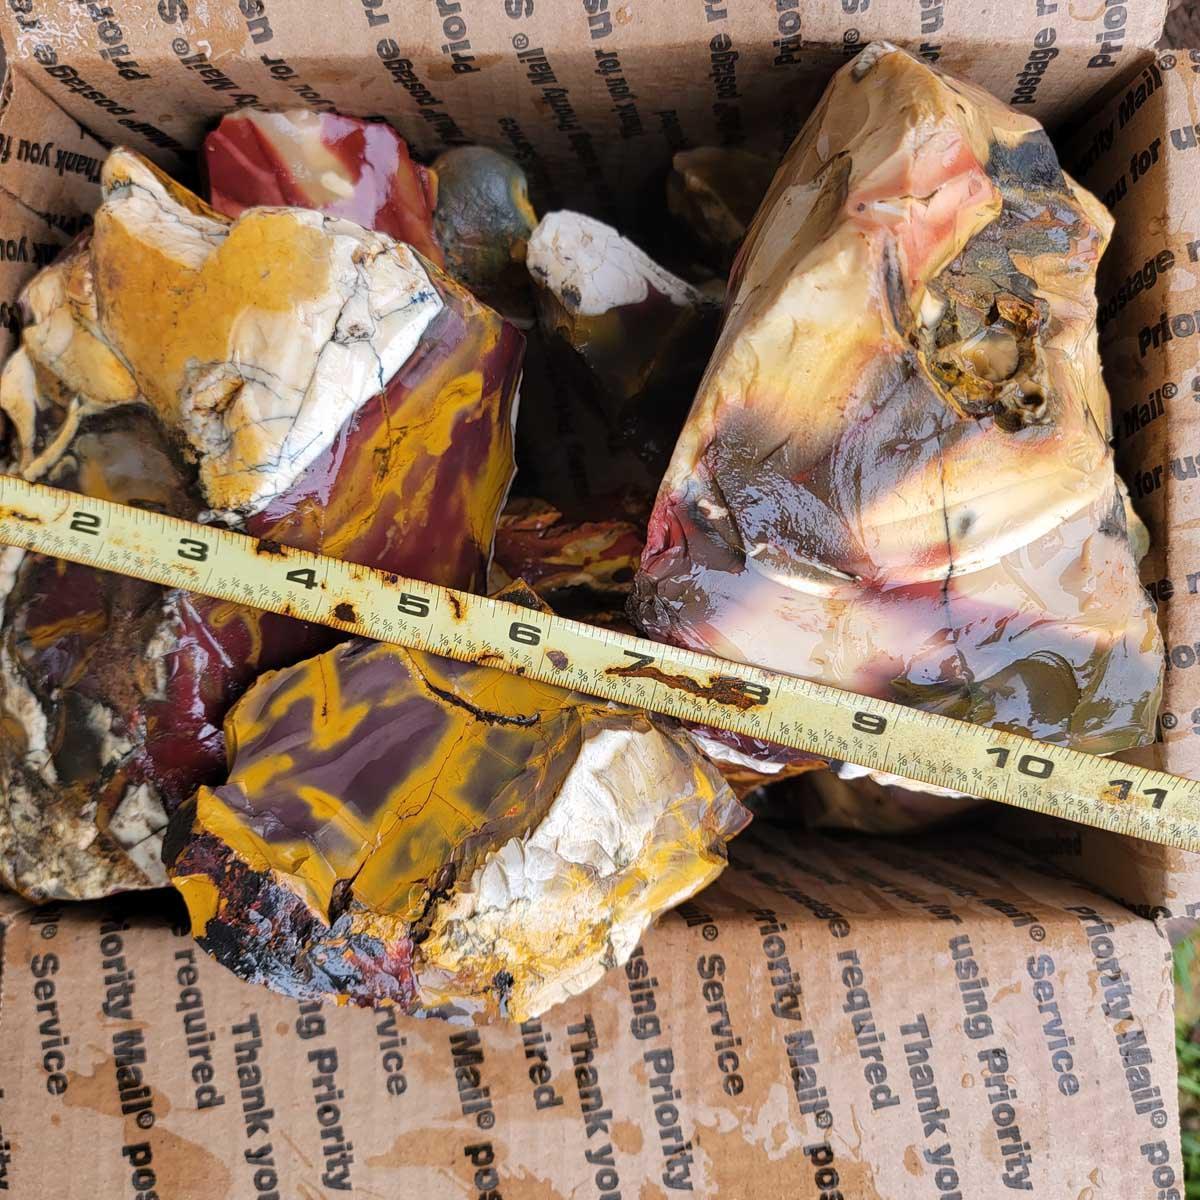 High Grade Mookaite Jasper Lapidary Cutting Rough!  A+ Quality! - LapidaryCentral